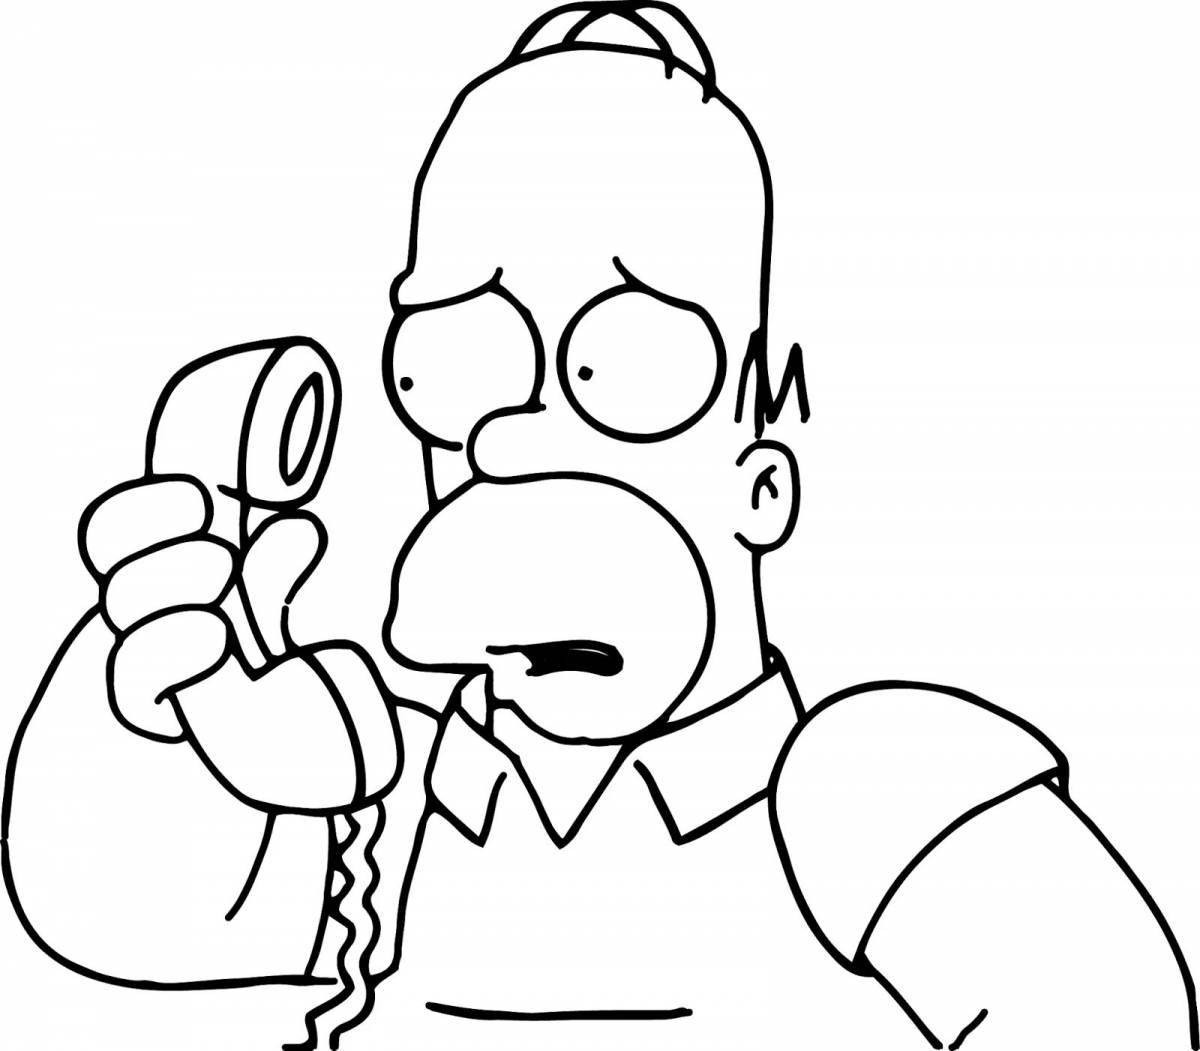 Homer simpson live coloring page